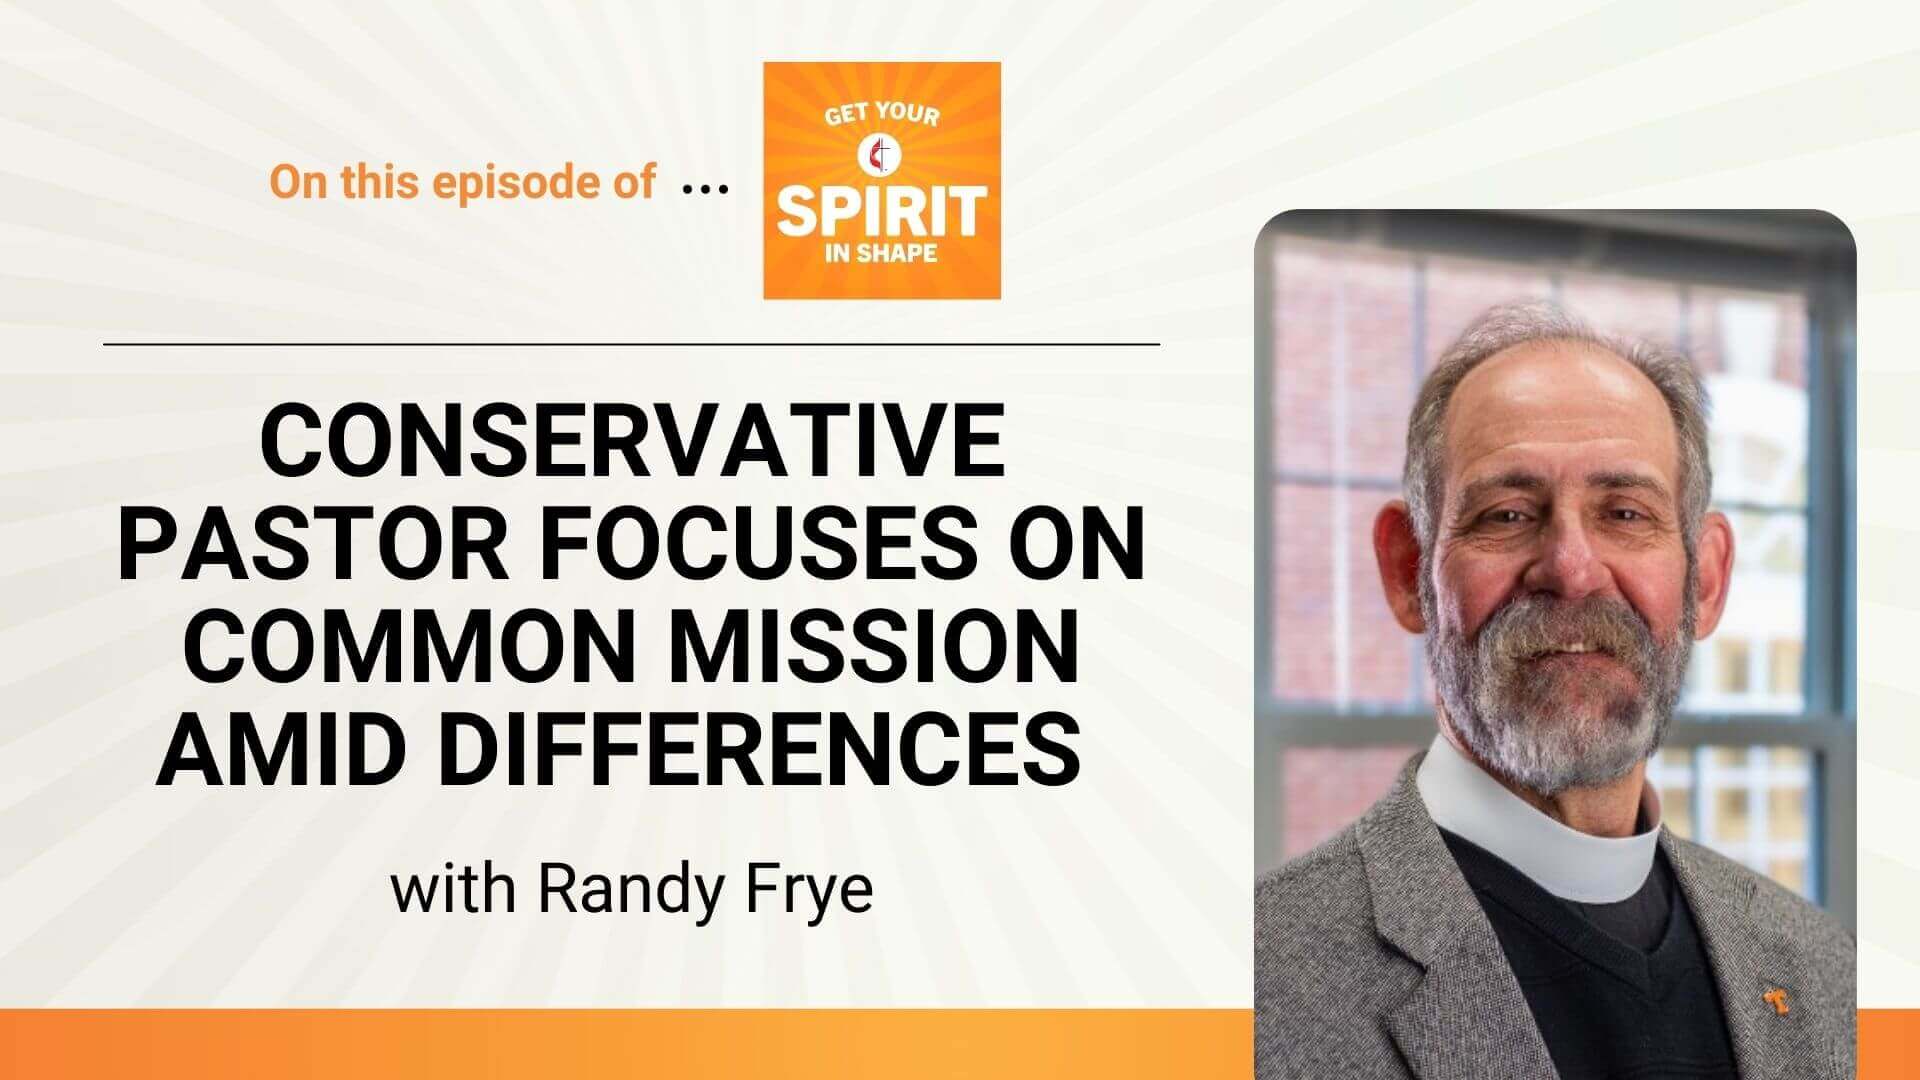 The Rev. Randy Frye is a guest on "Get Your Spirit in Shape."